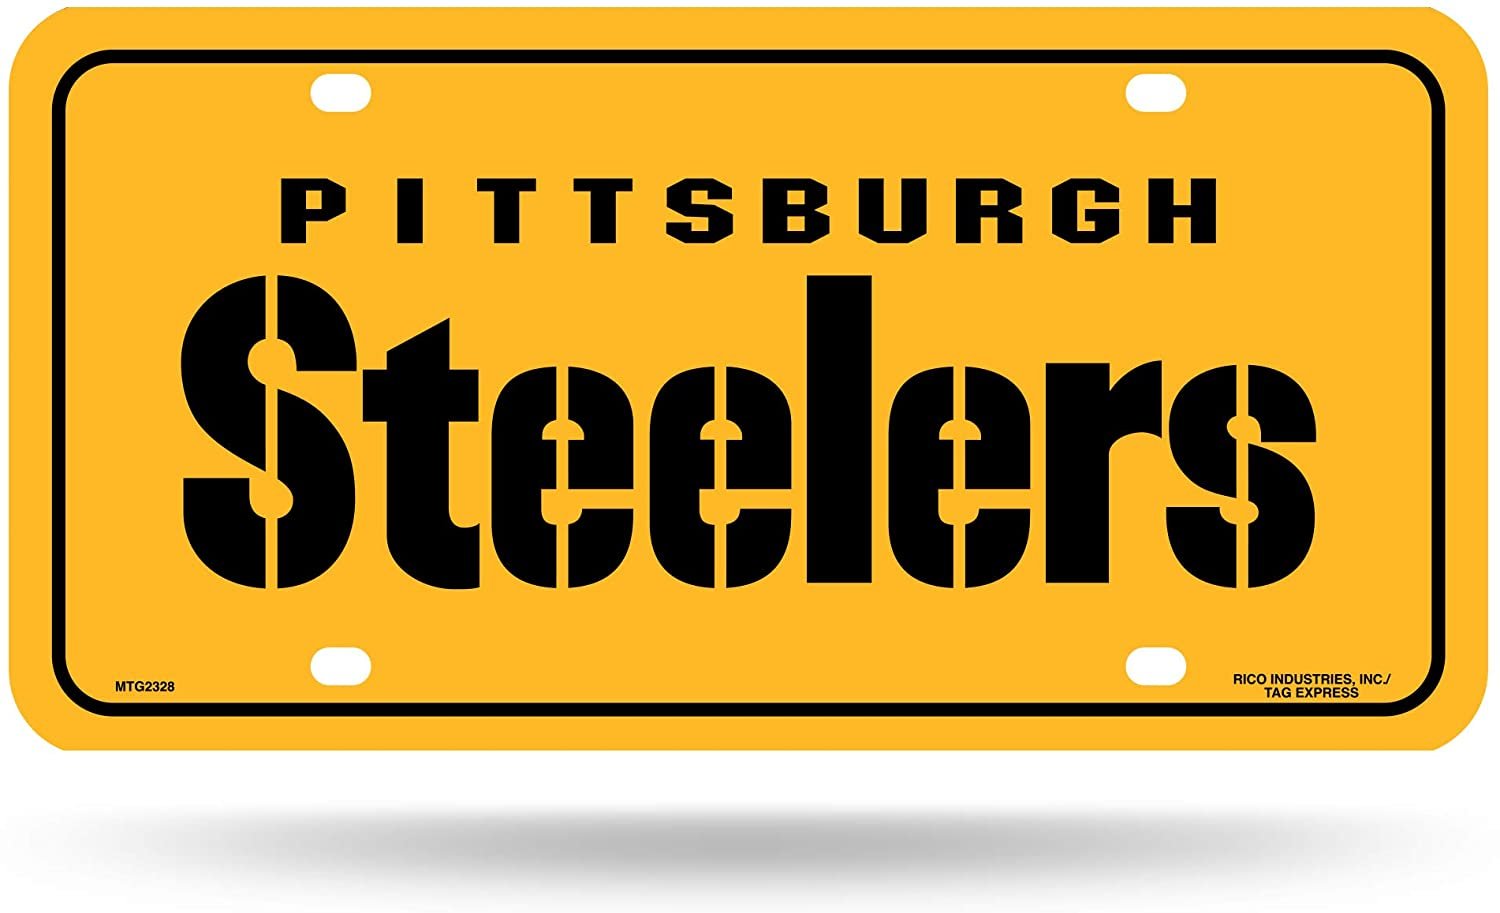 Pittsburgh Steelers Metal Auto Tag License Plate, Yellow Team Name Design, 6x12 Inch